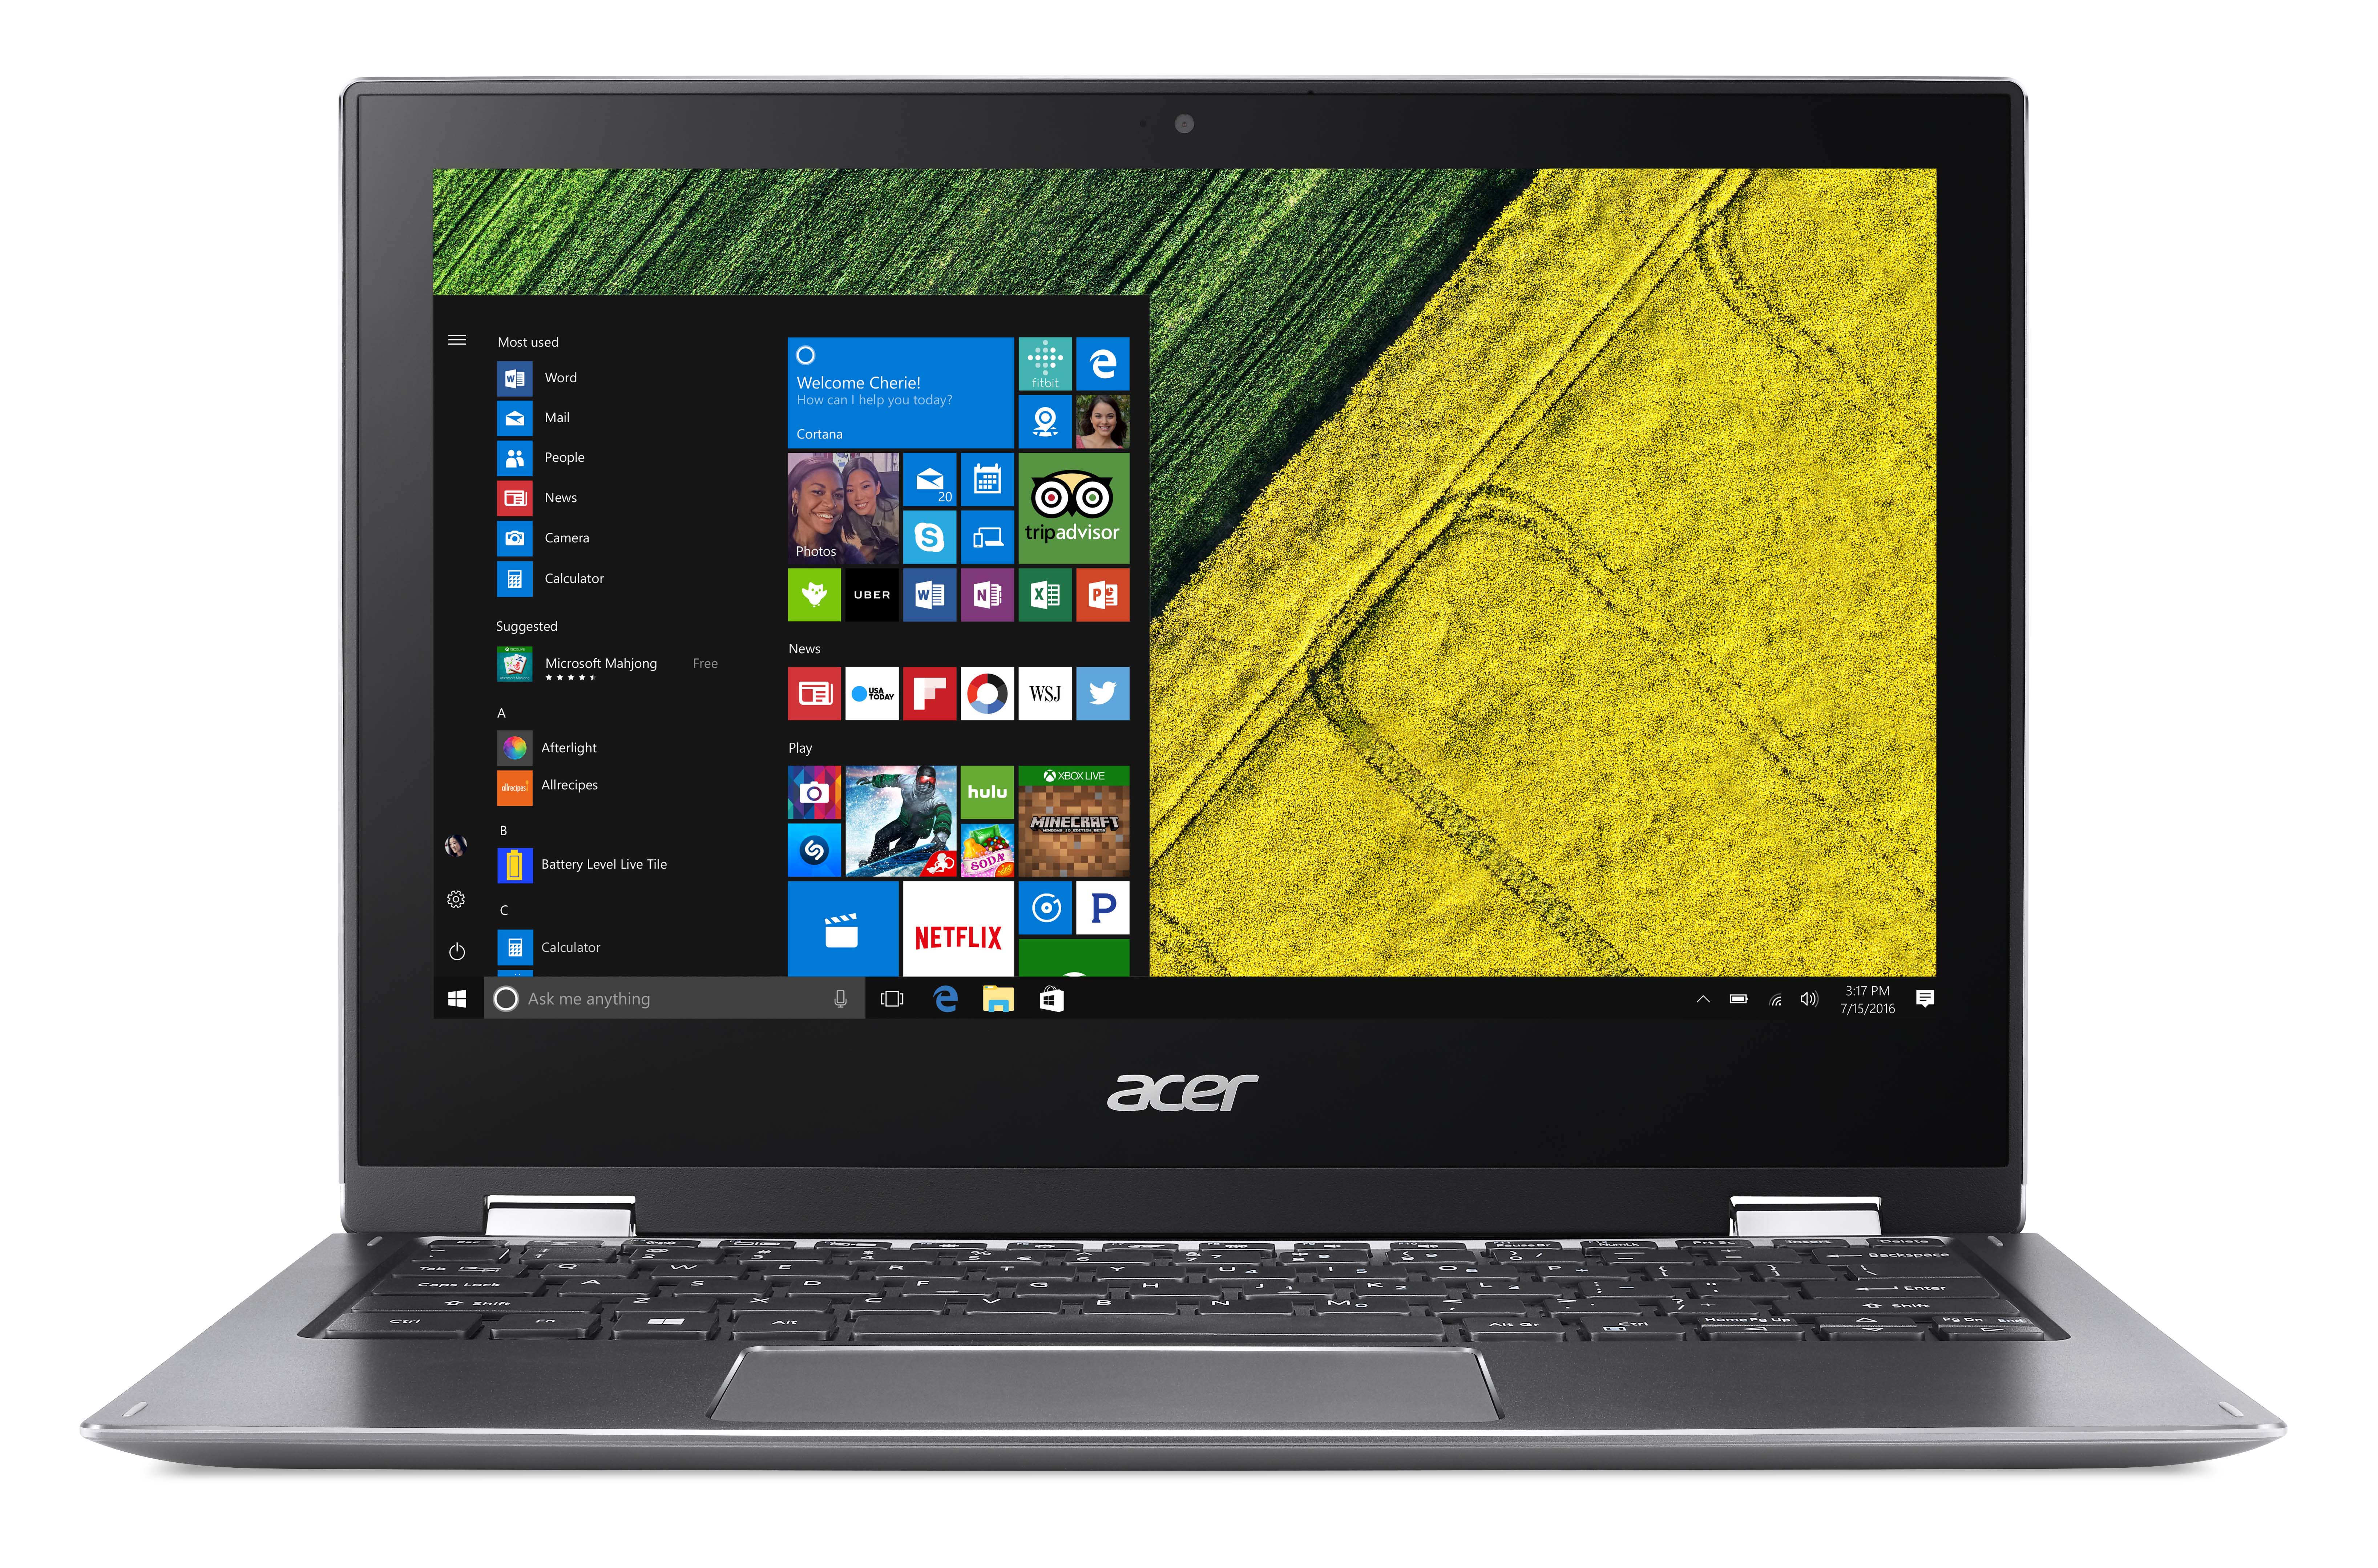 Acer Spin 1 front facing with Windows 10